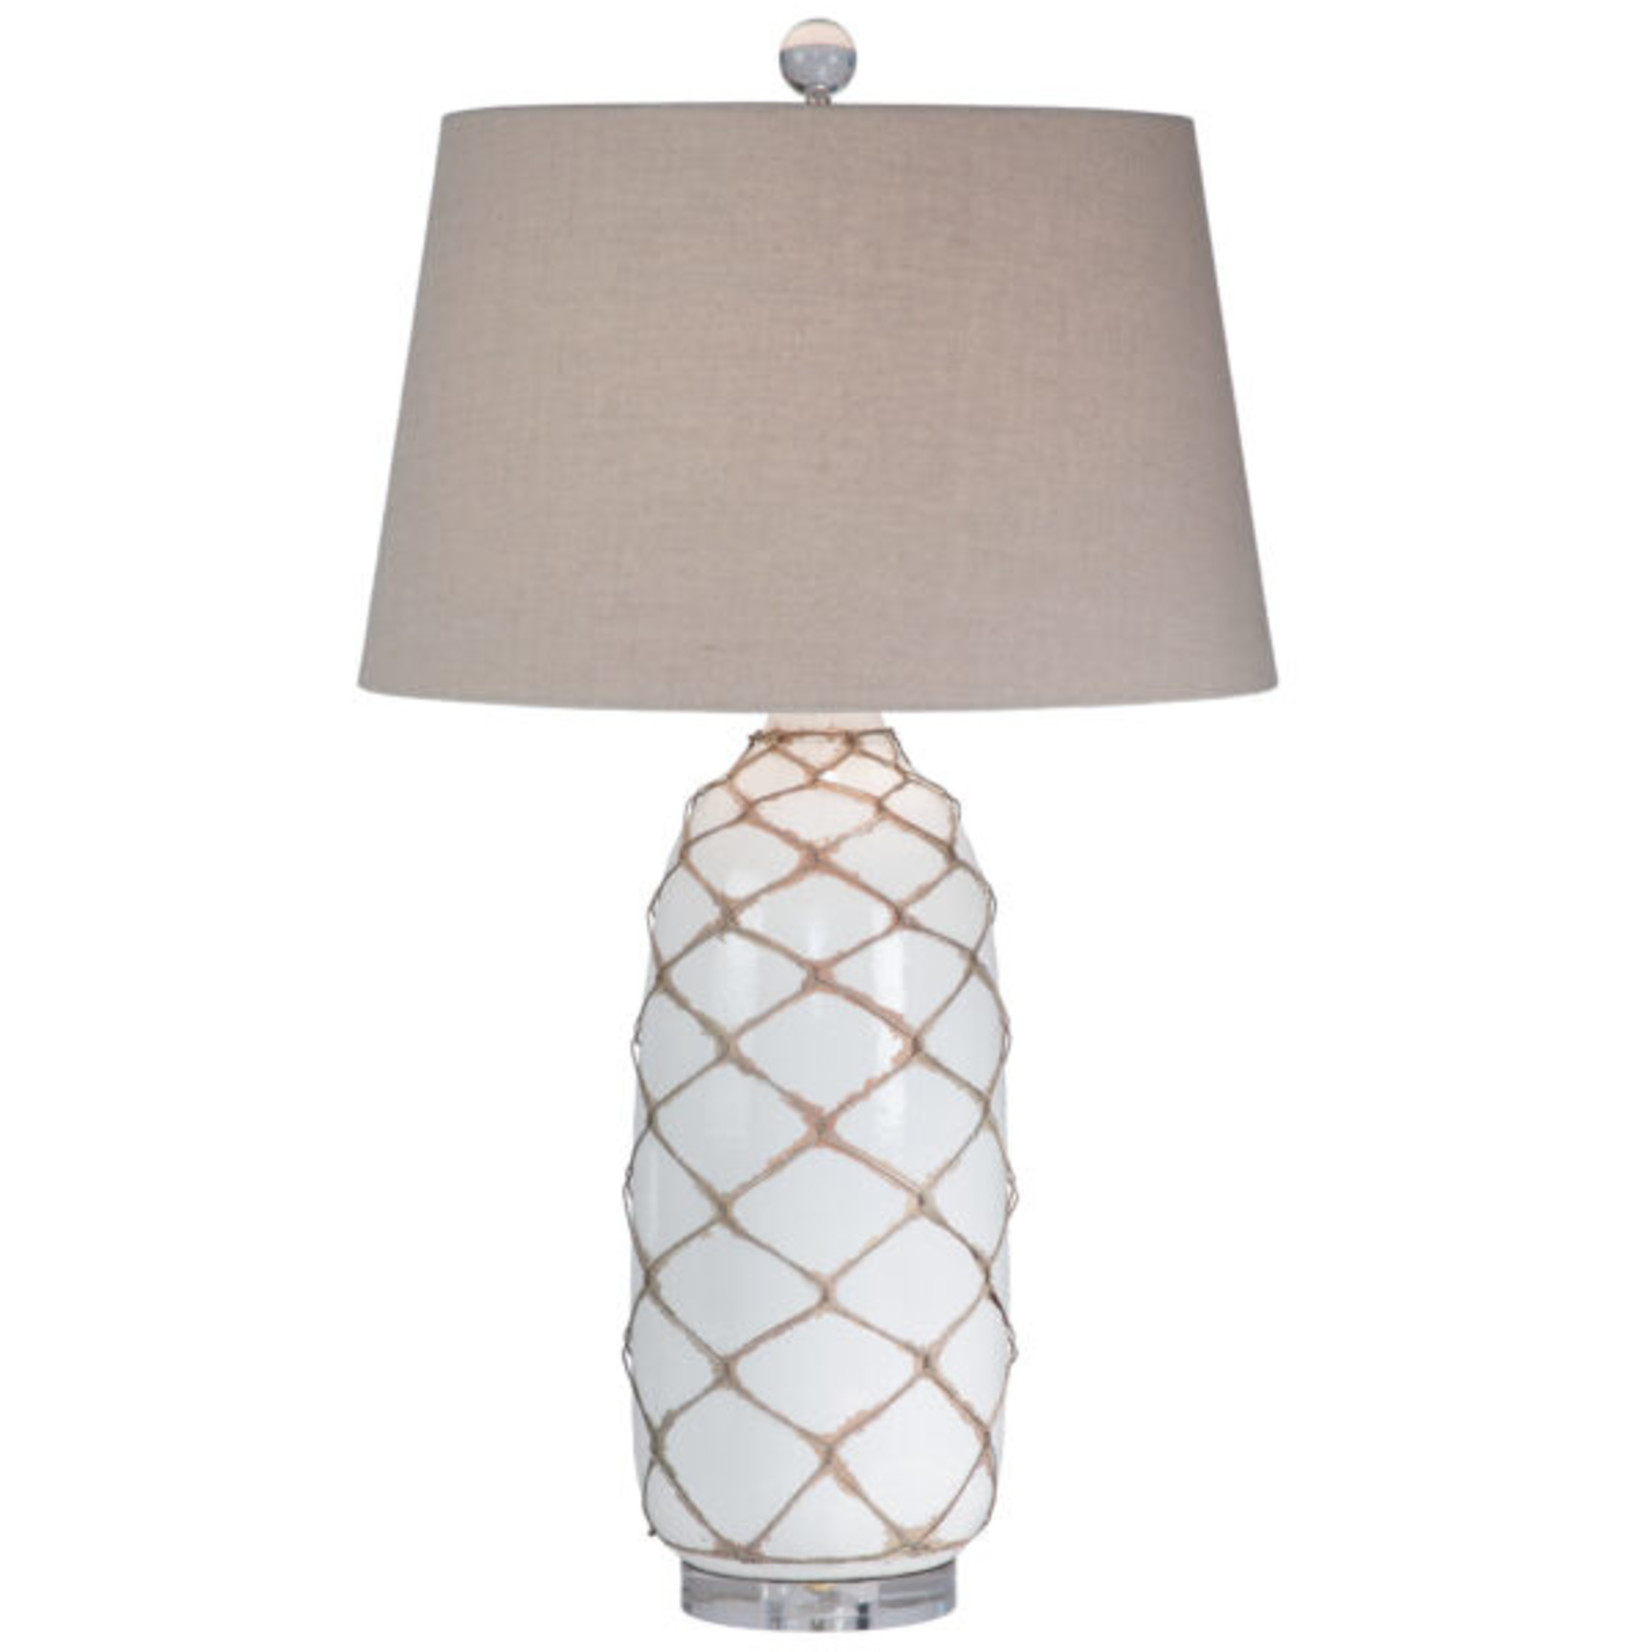 Webster Distressed Silver Wire Table Lamp - NL